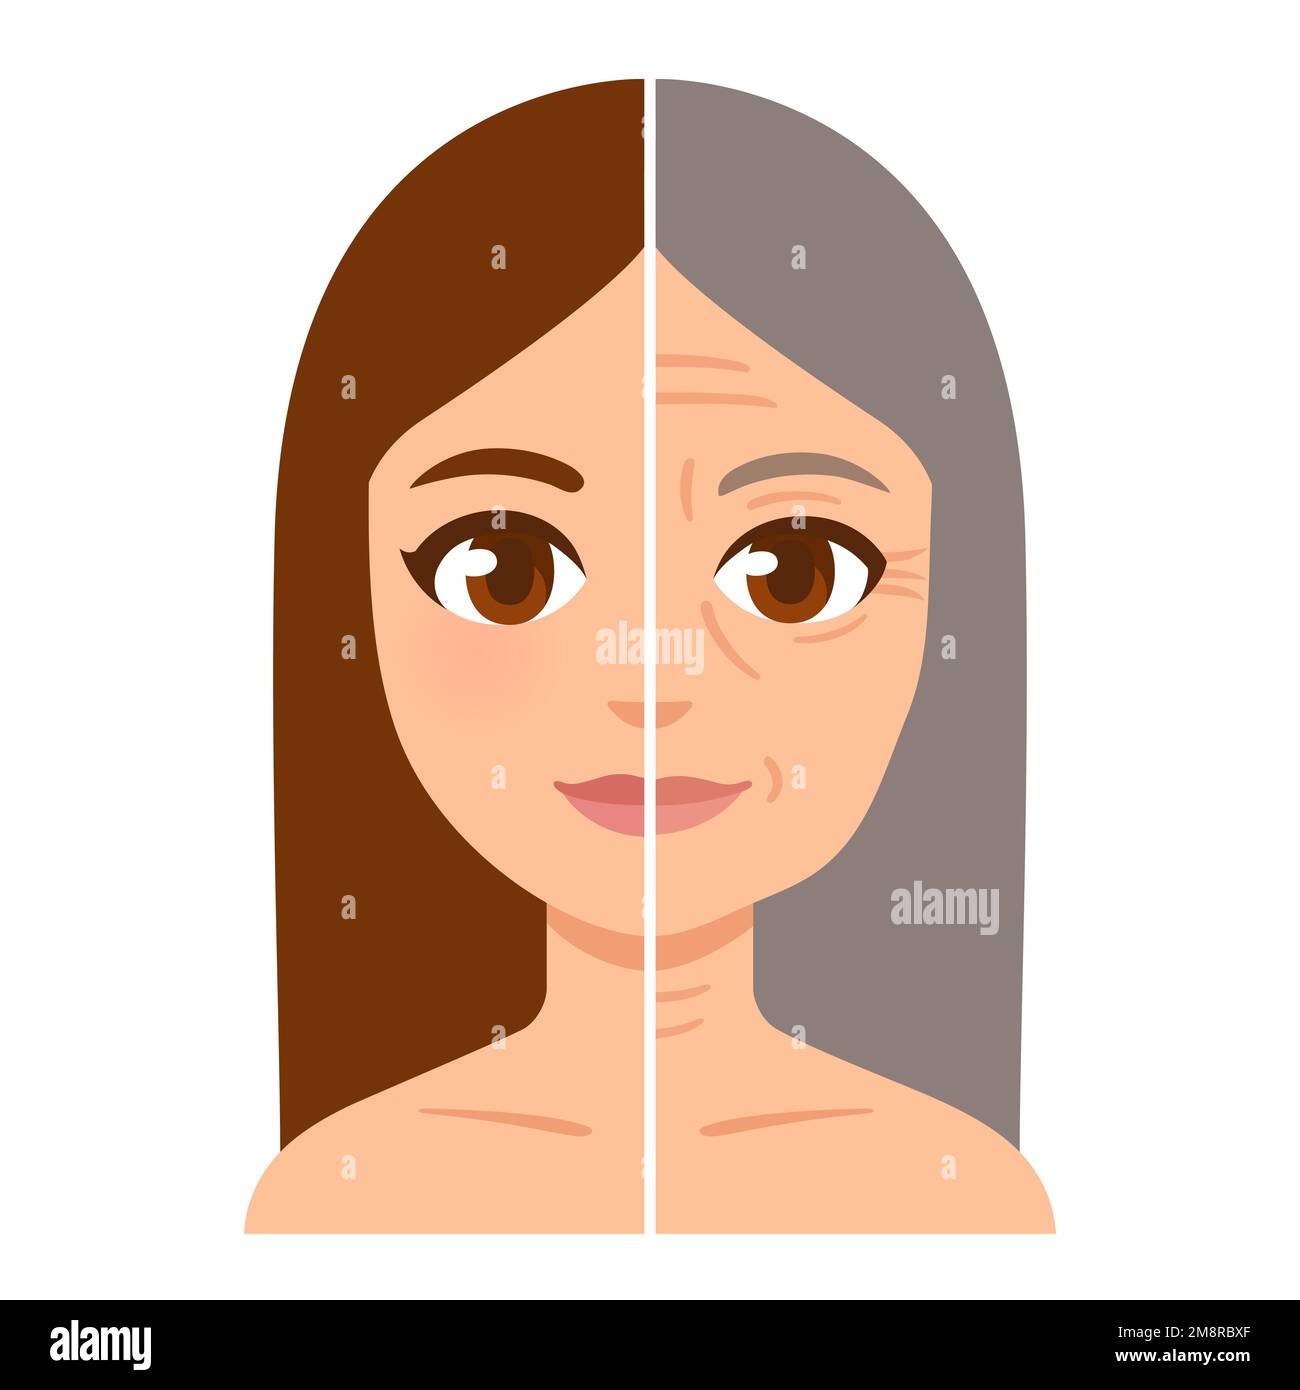 Female face divided in half, young girl and old woman with wrinkles. Cartoon style vector illustration. Stock Vector